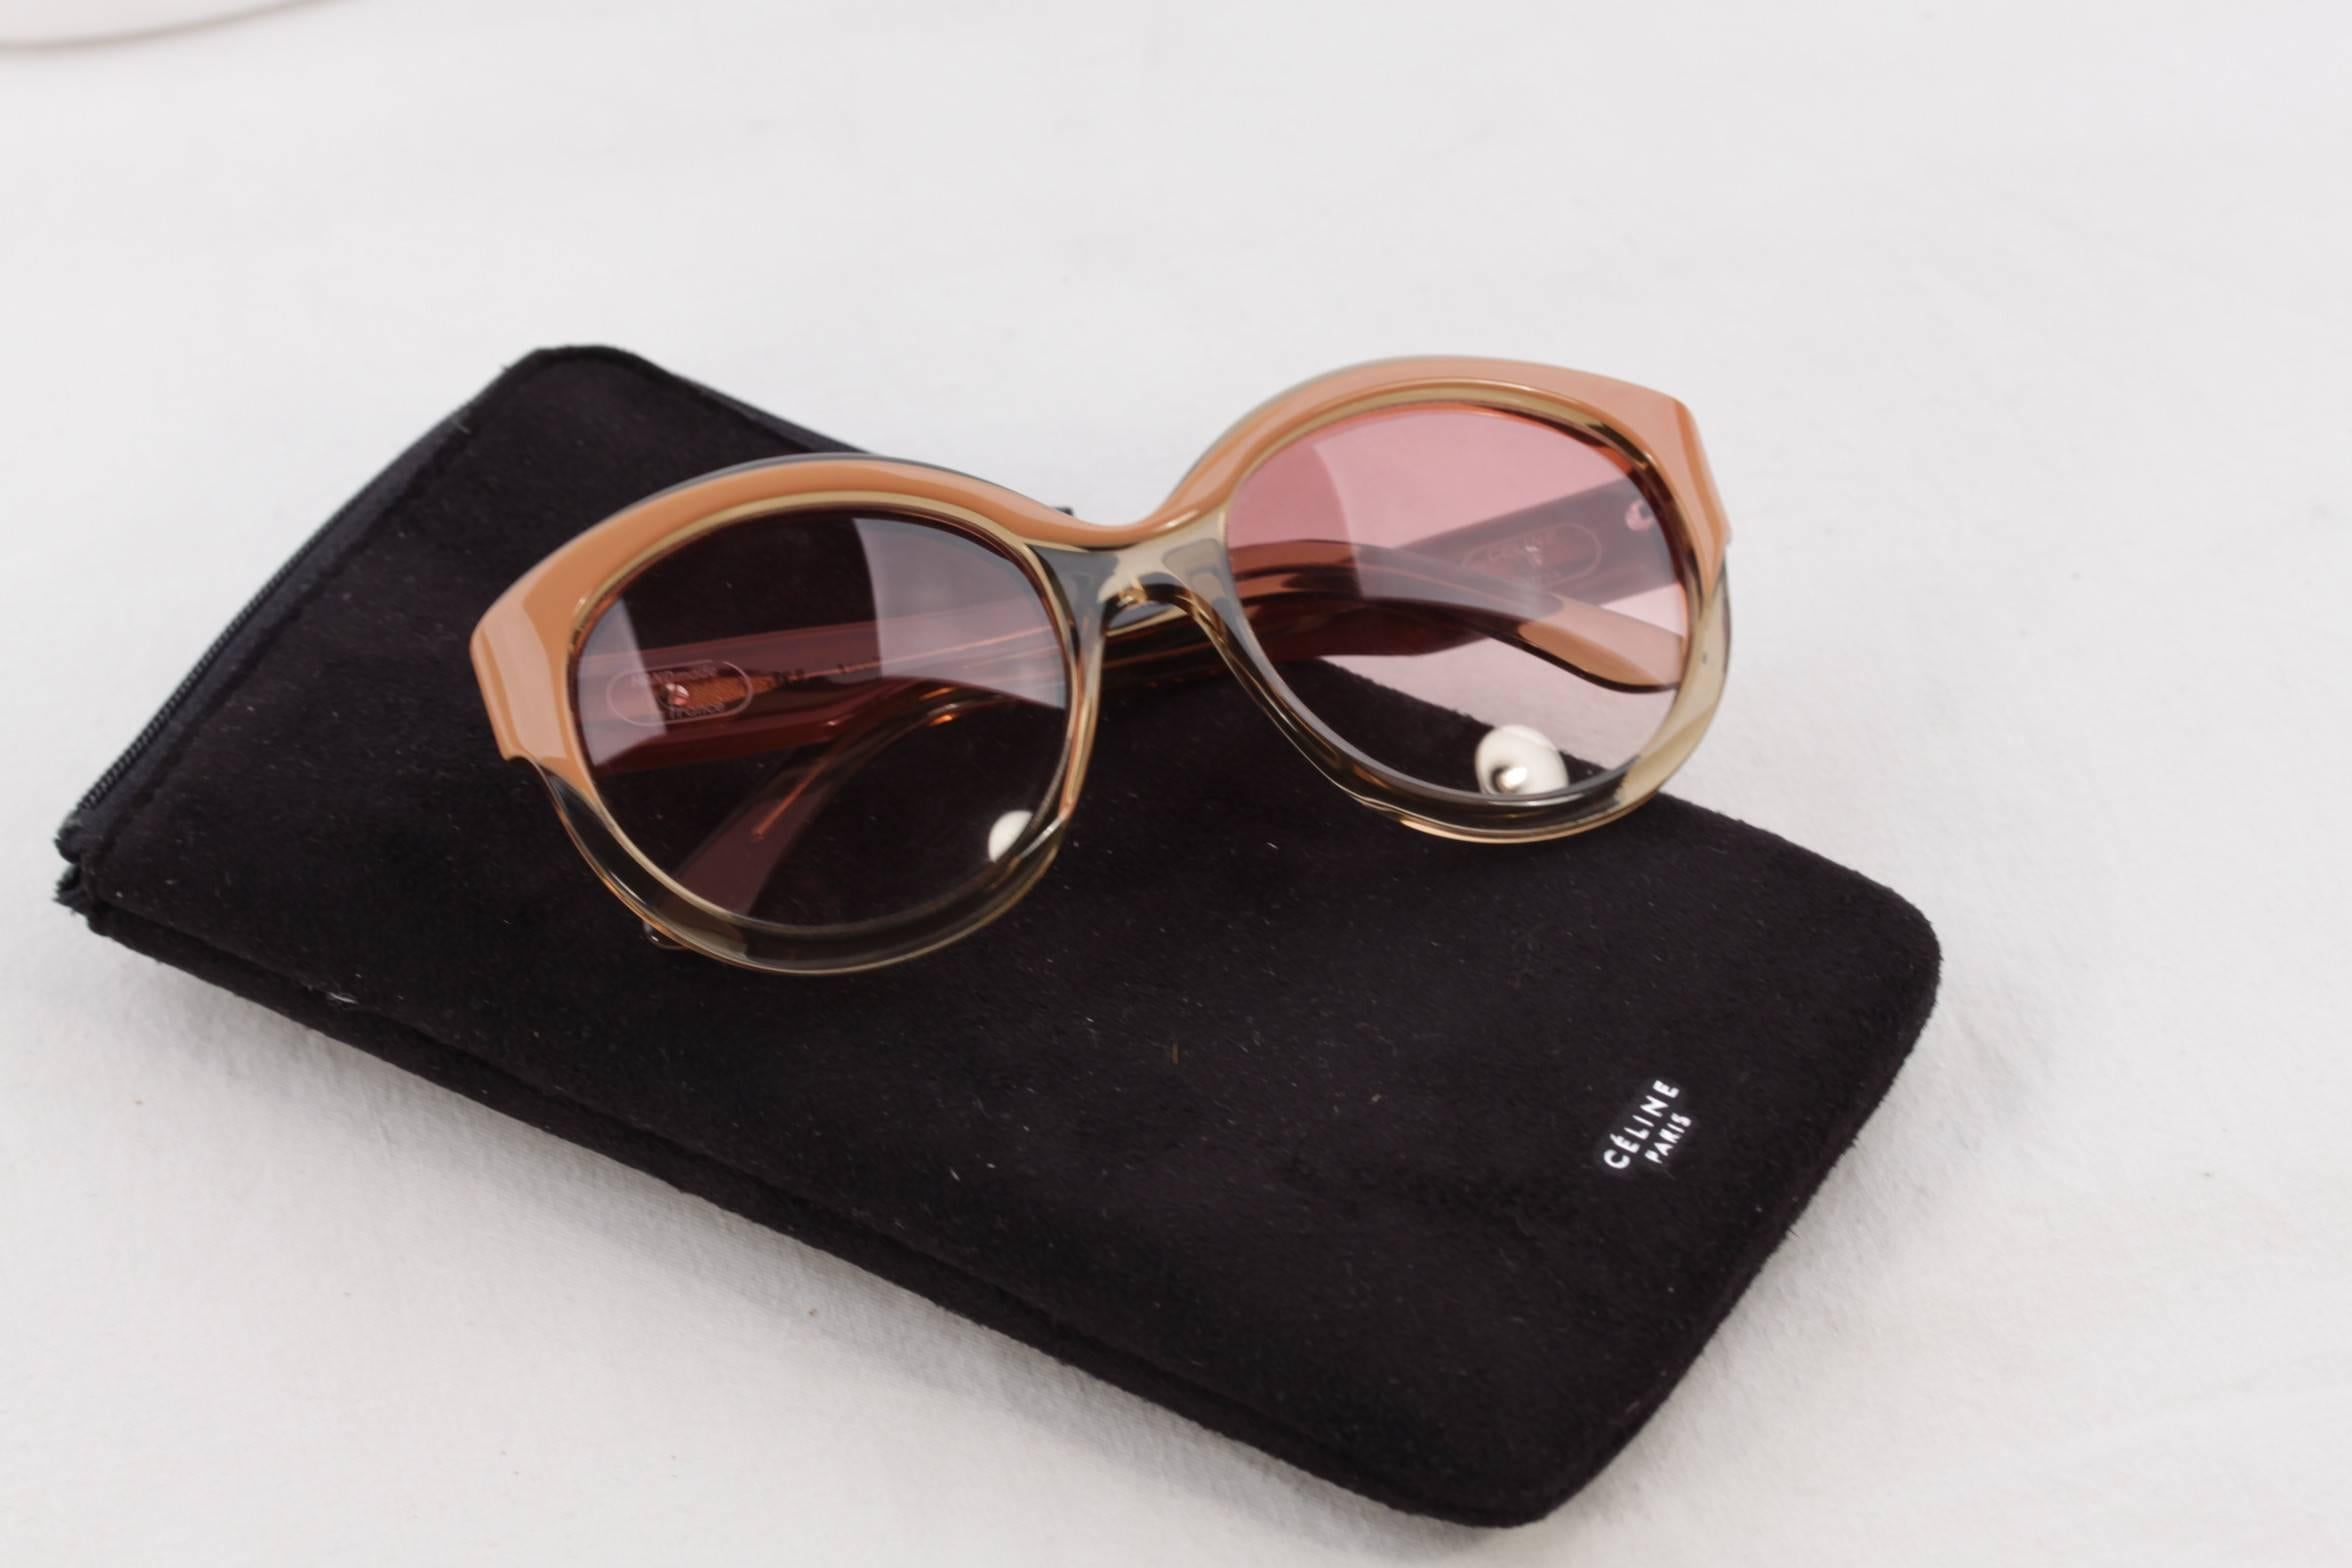 Pink/Peach acetate frame

Comes with a CELINE softcase (with some wear due to storage)

CELINE logos on temples

Gradient/faded pink lenses

Frame made in France

Any other detail which is not mentioned may be seen on the item pictures.